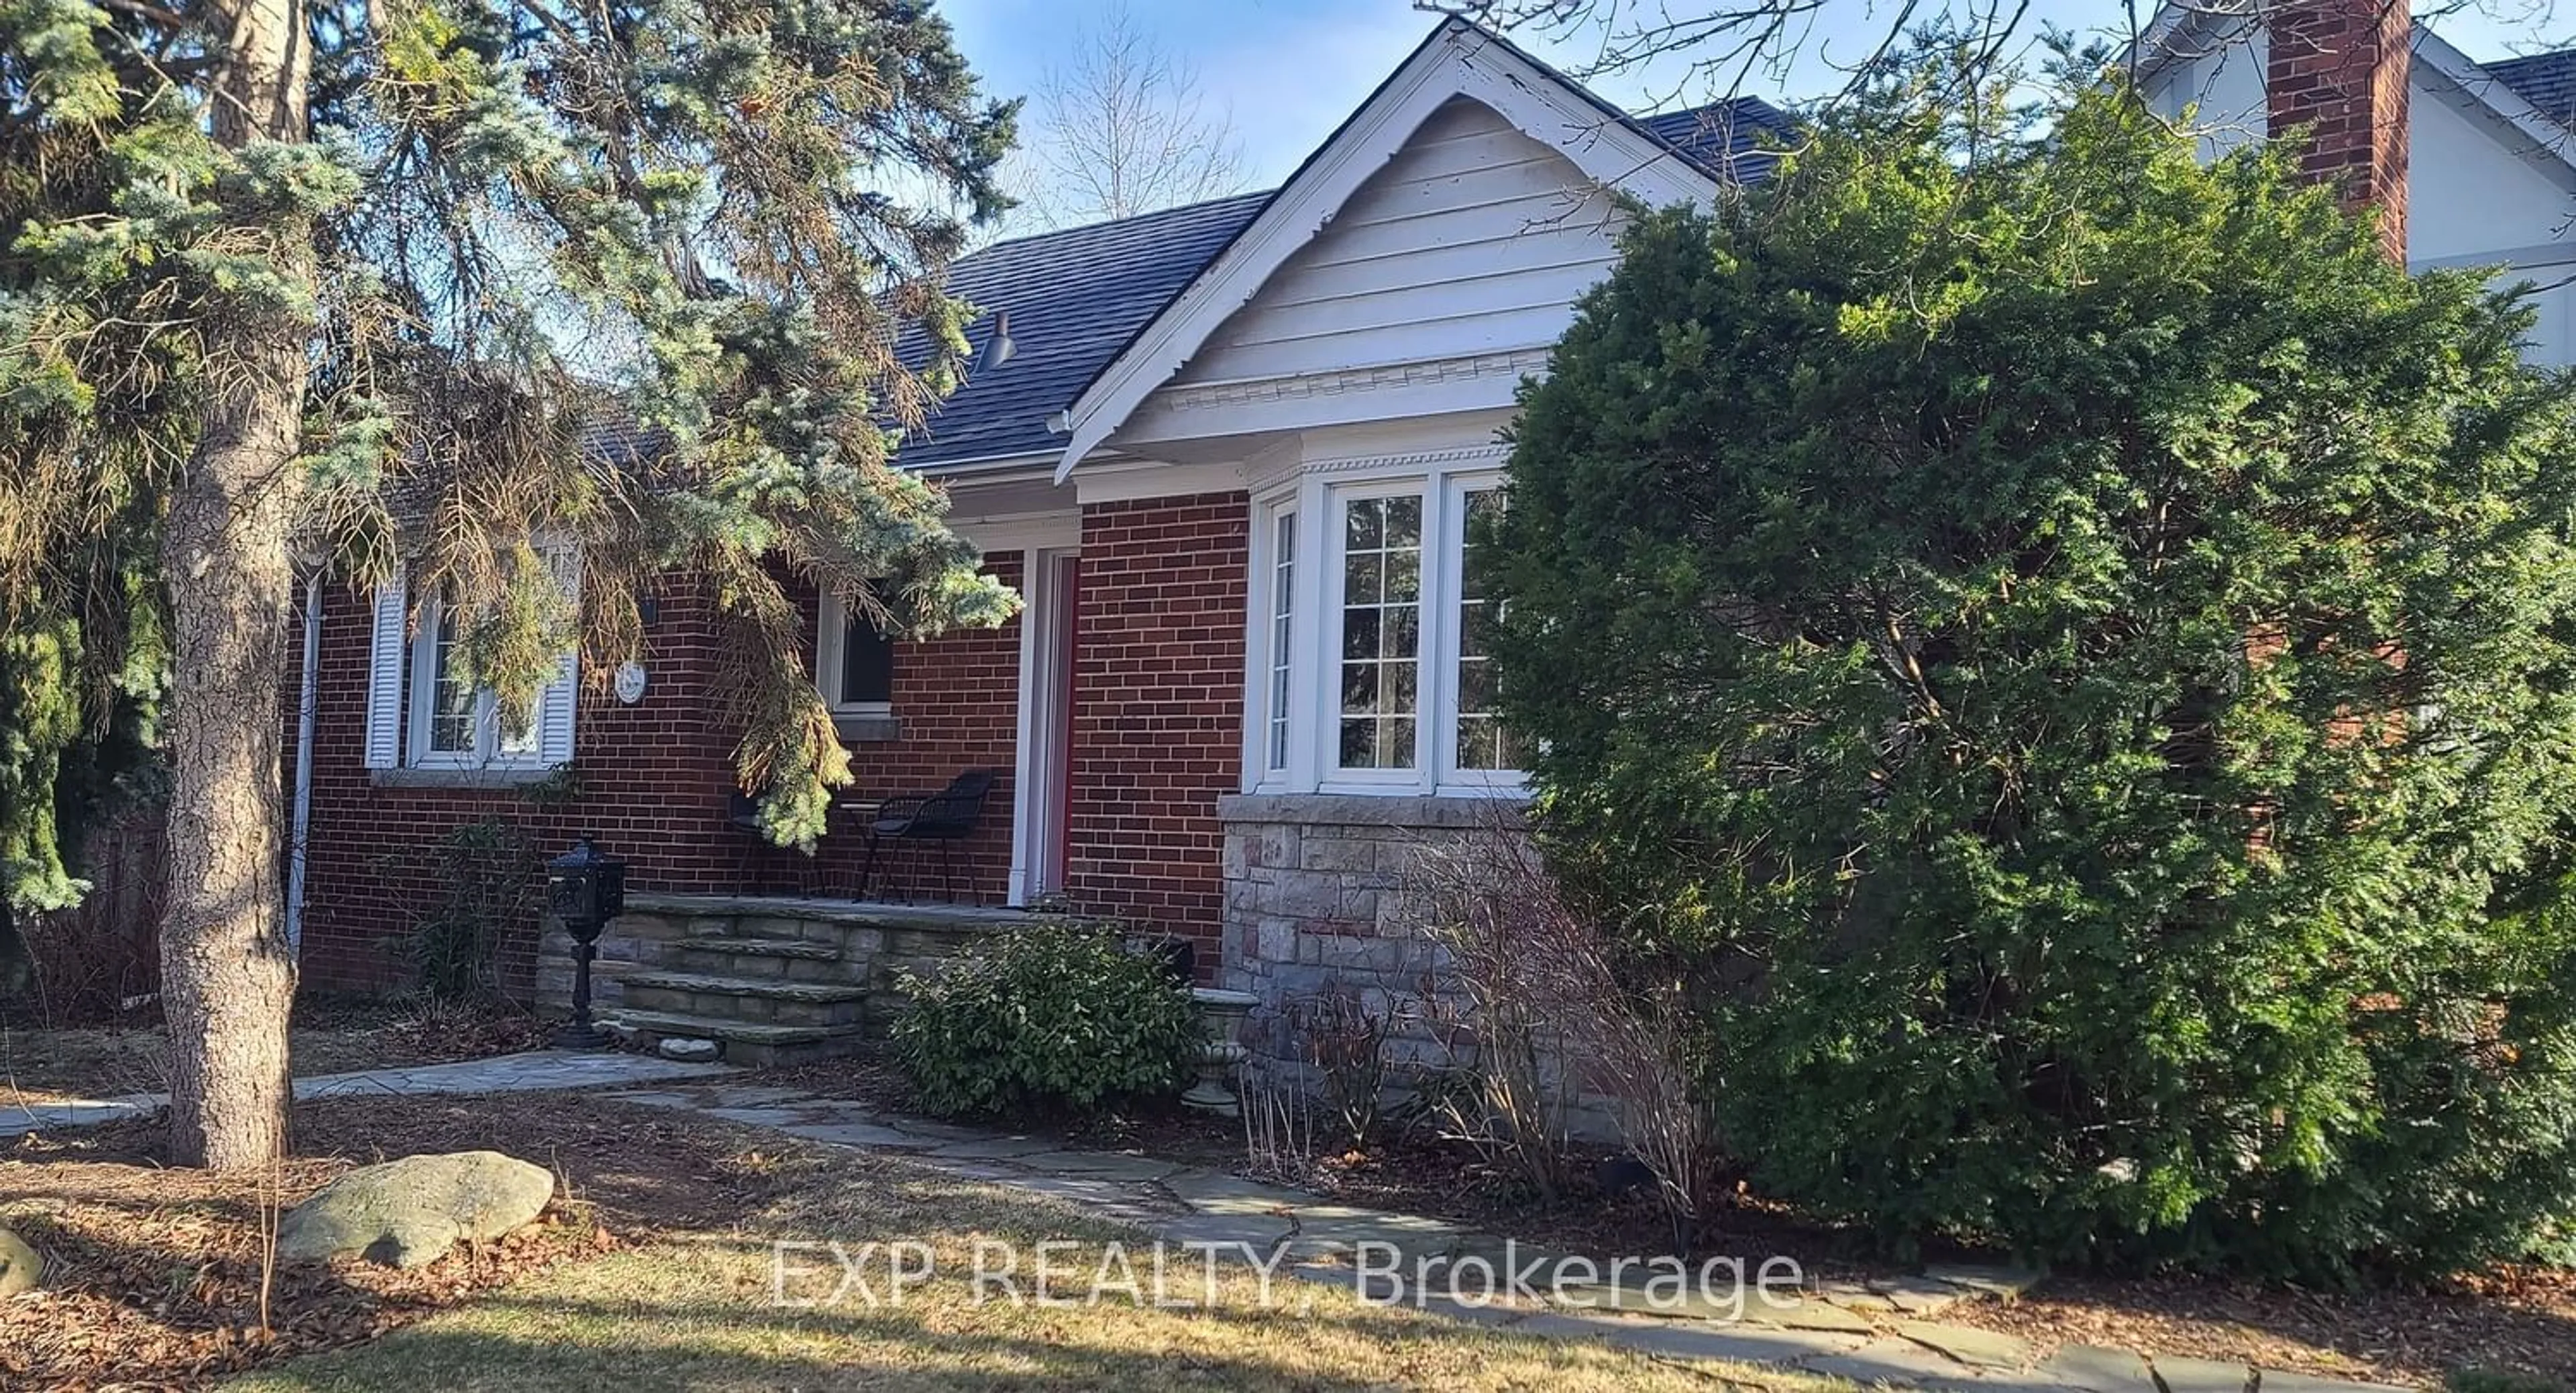 Home with brick exterior material for 25 Mcclinchy Ave, Toronto Ontario M8X 2H9